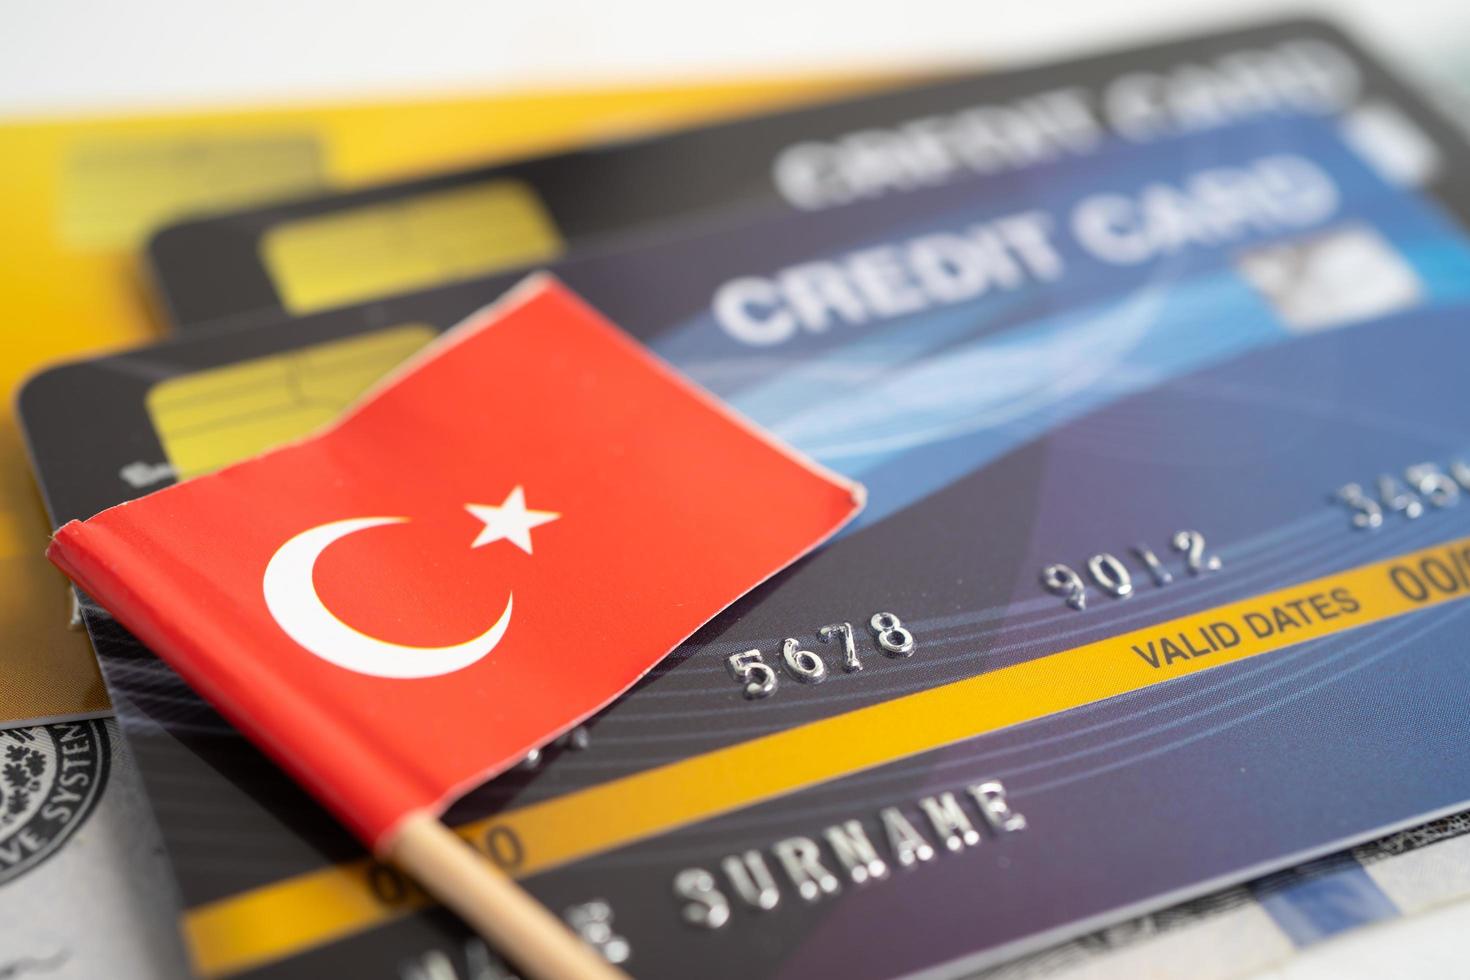 Where Can You Use Credit Cards in Turkey?